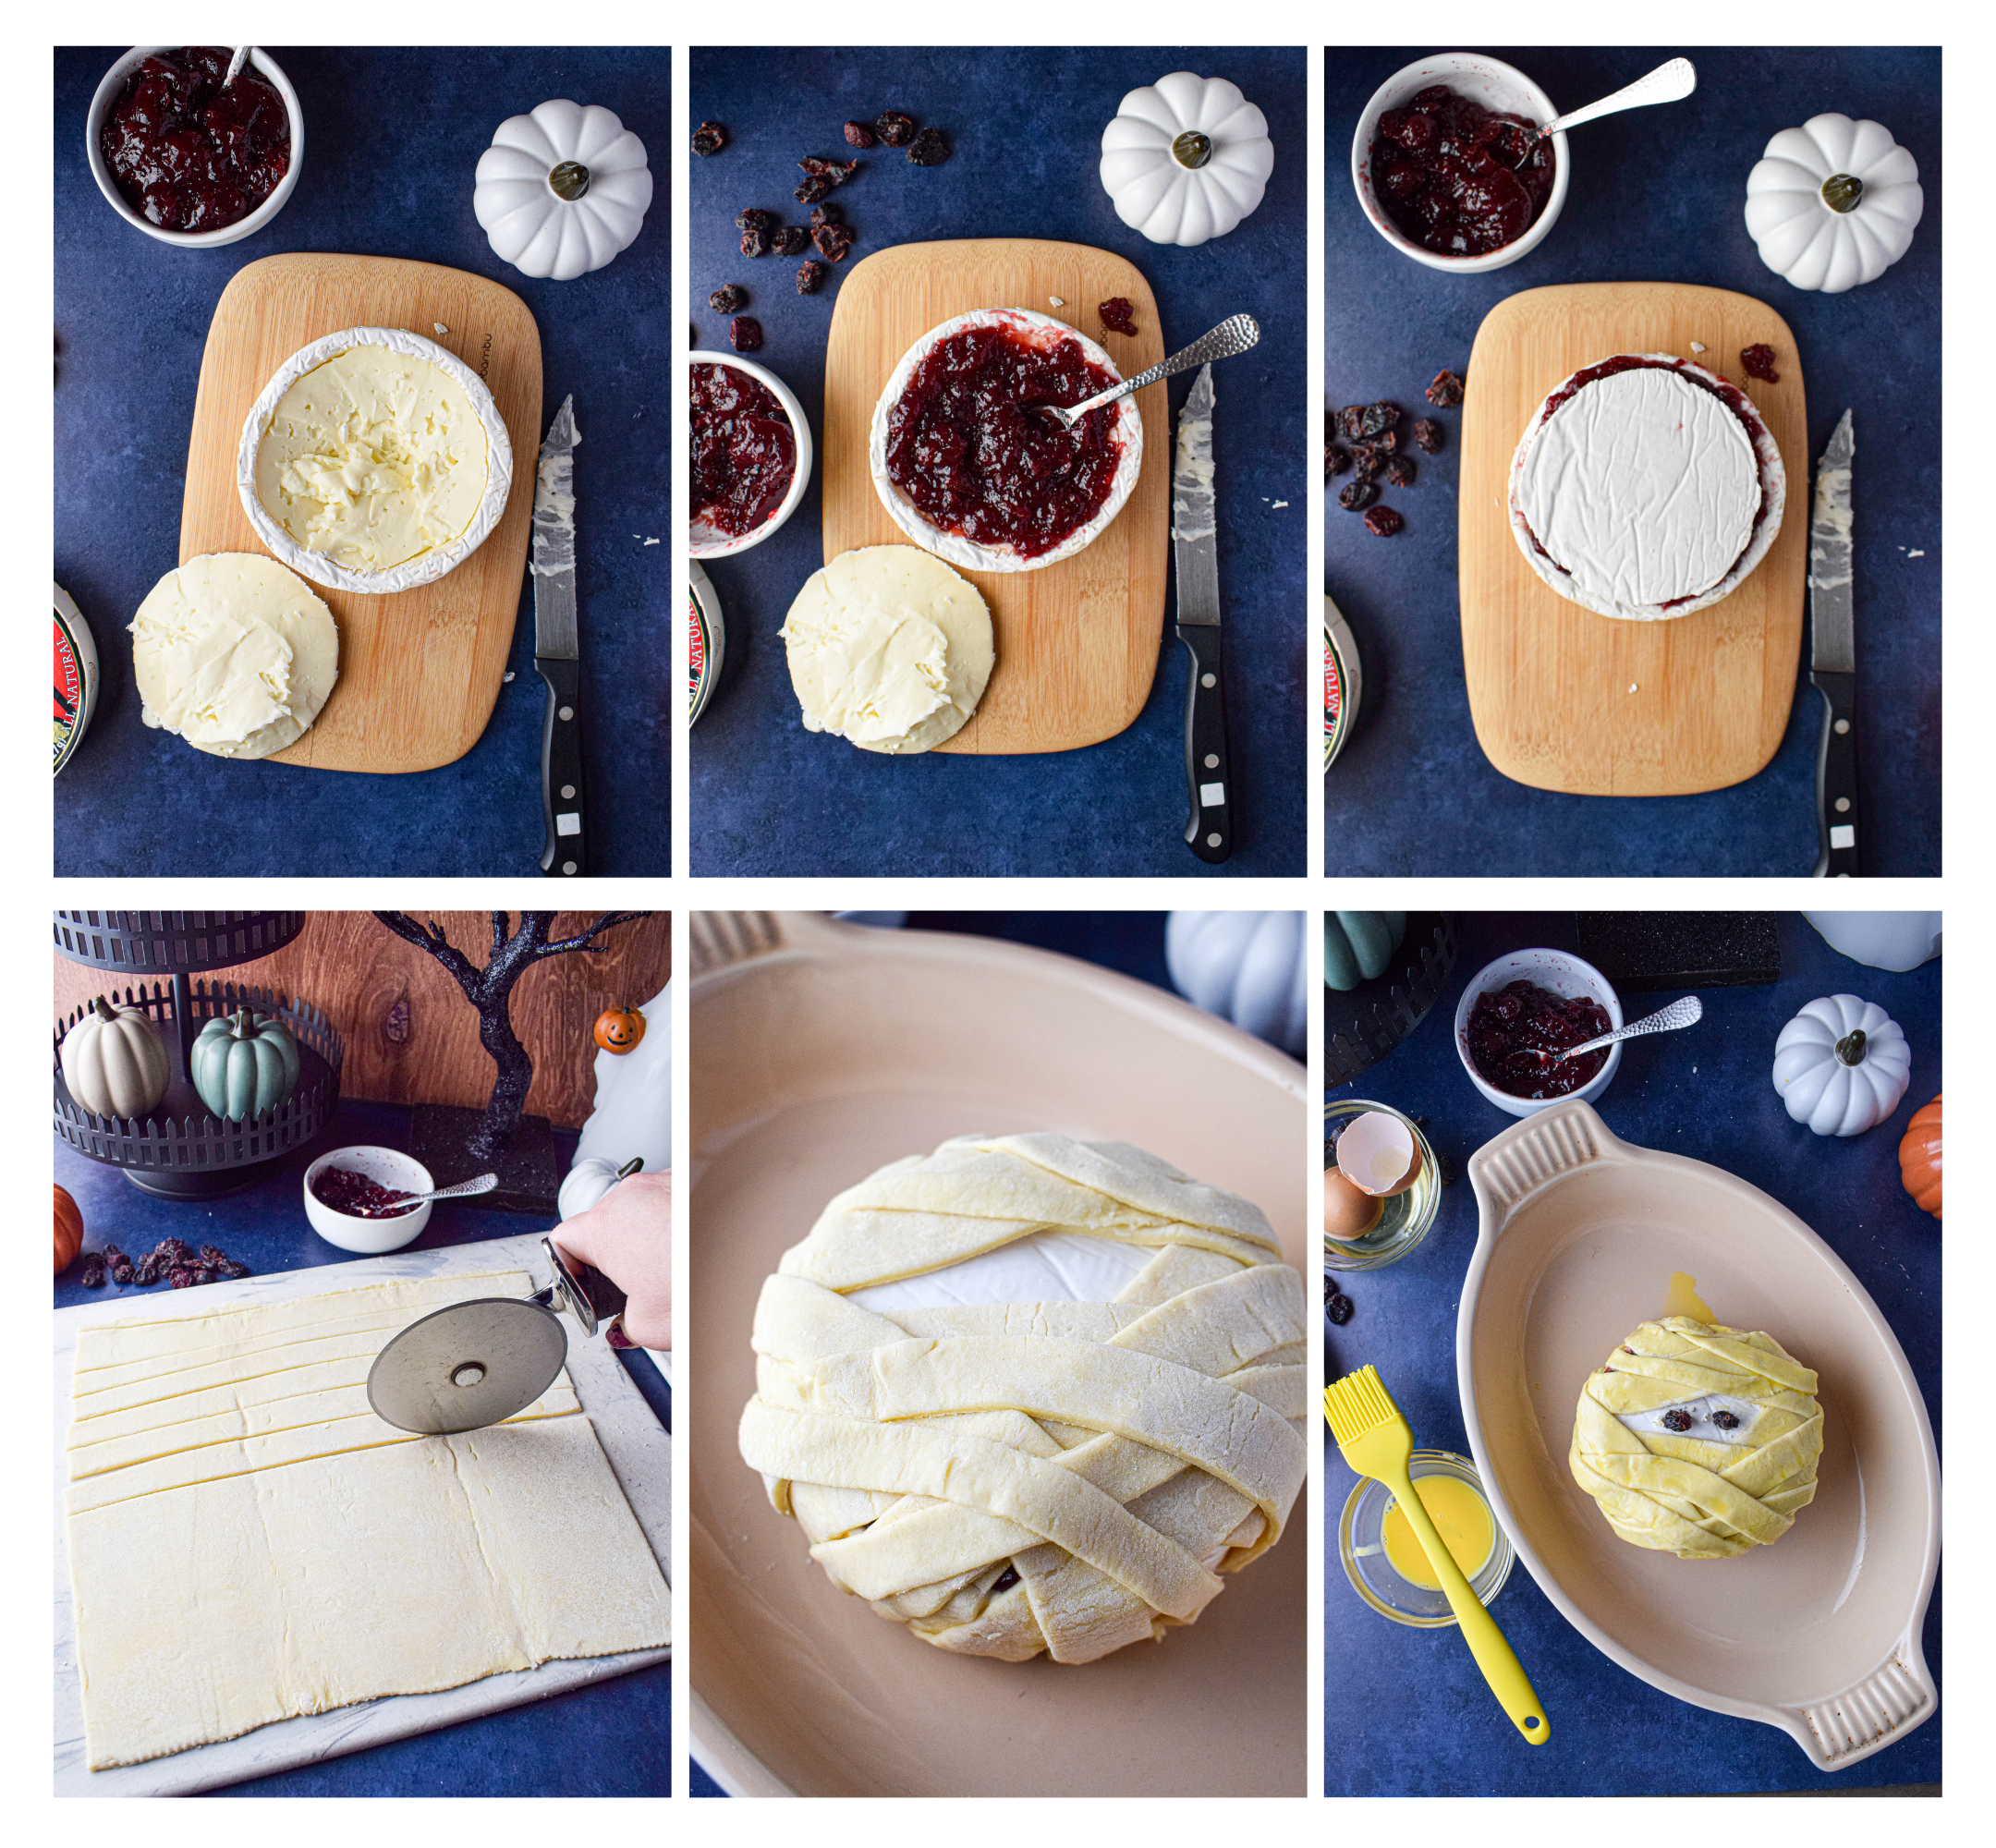 step by step photos for puff pastry wrapped mummy brie: cutting the top off the brie, filling it with jam, replacing the top, cutting strips of puff pastry, wrapping the brie with puff pastry strips, brushing with egg was